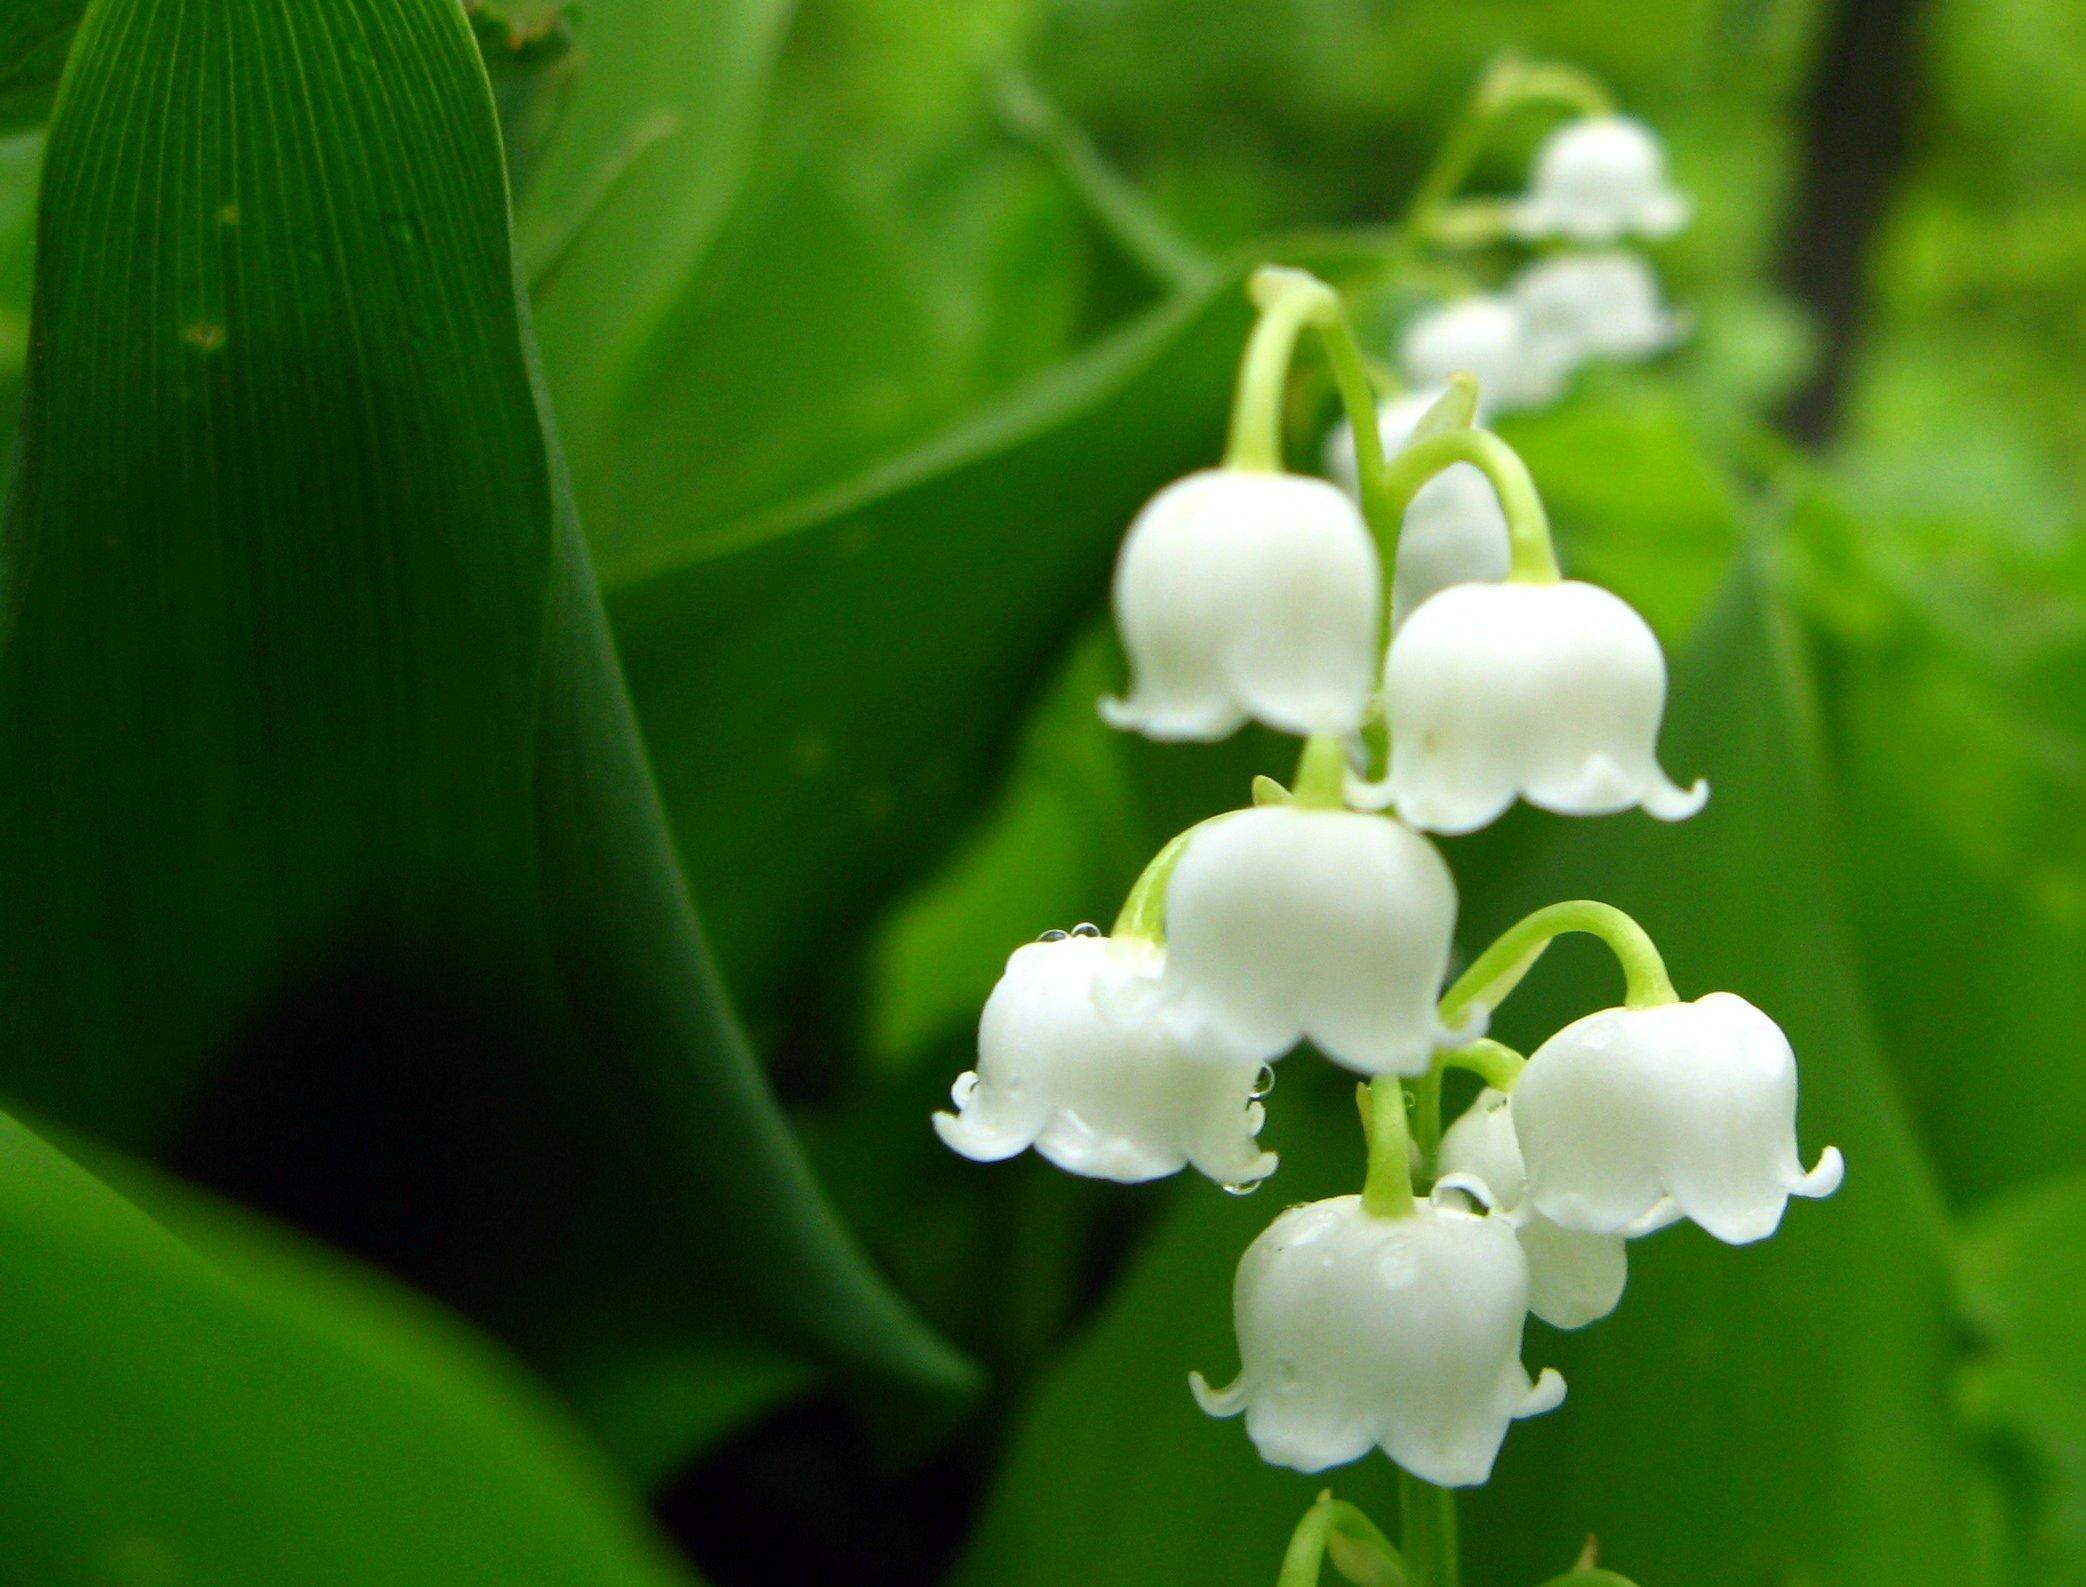 Lily Of The Valley Image # 1226x1108. All For Desktop